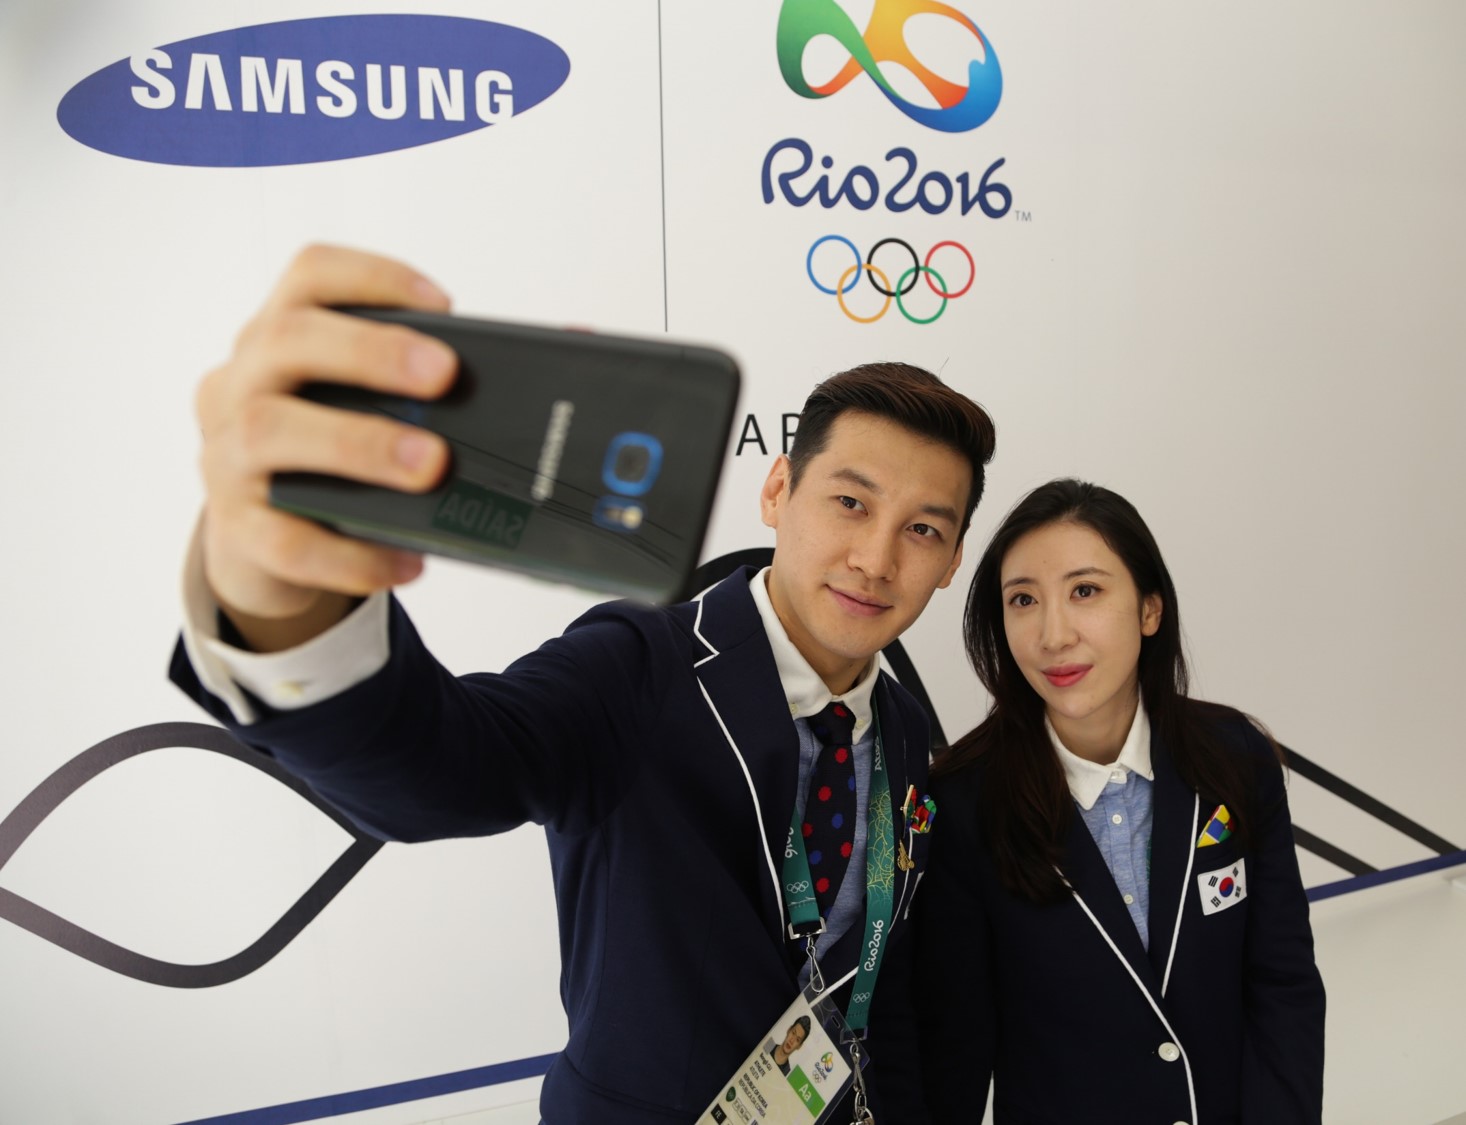 Samsung Delivers 12,500 Galaxy S7 edge Olympic Games Limited